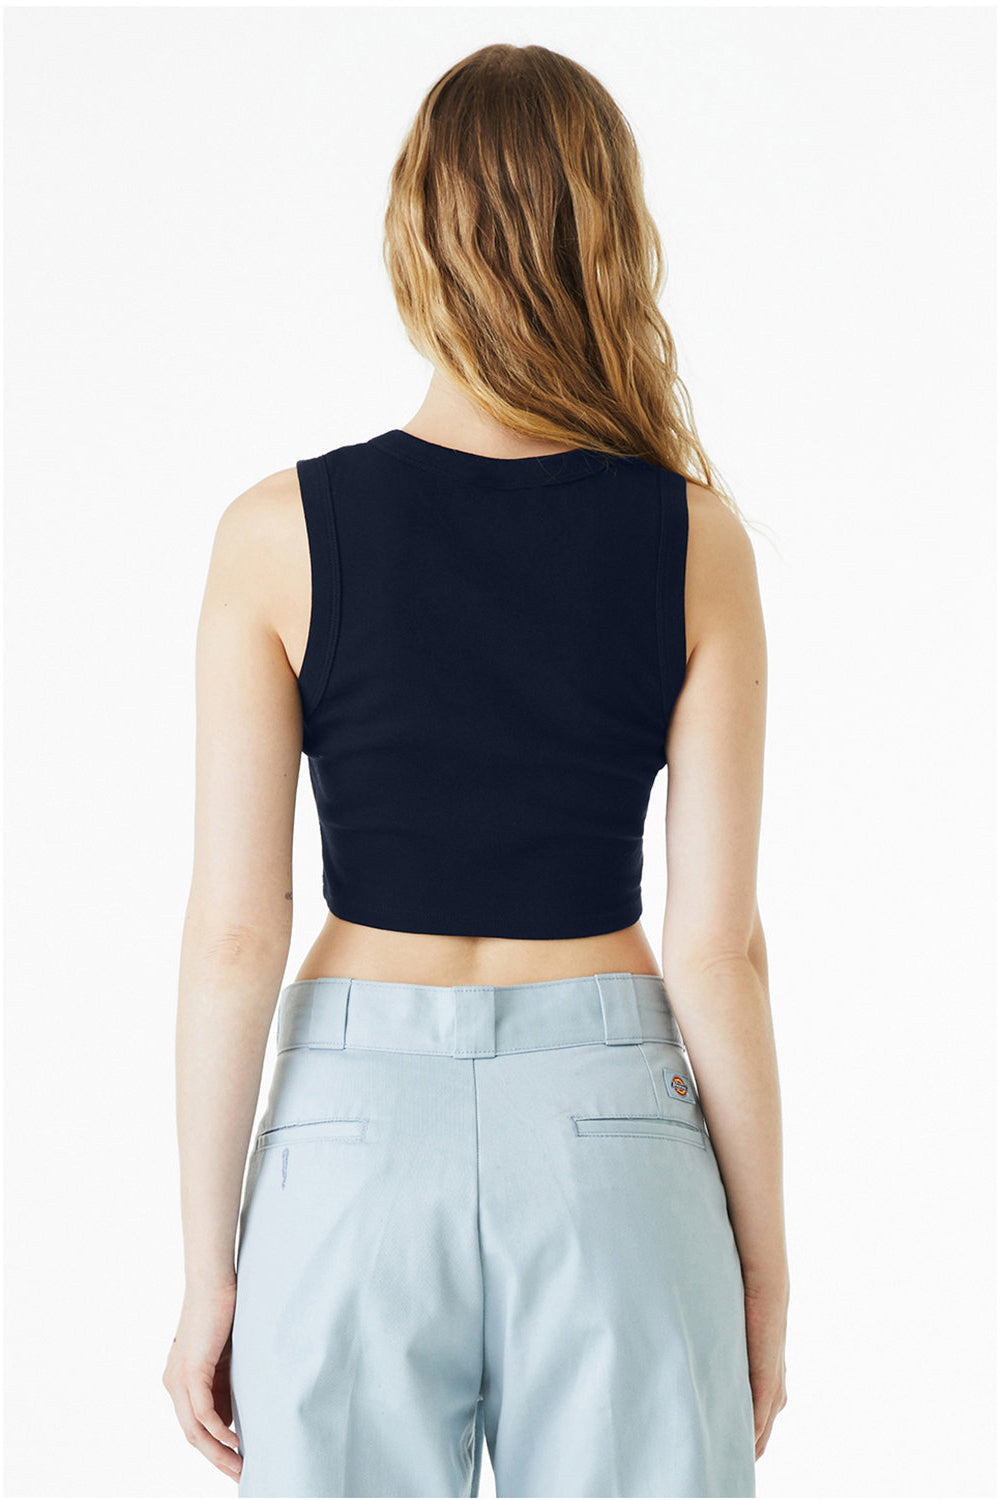 Bella + Canvas 1013BE Womens Micro Ribbed Muscle Crop Tank Top Navy Blue Model Back